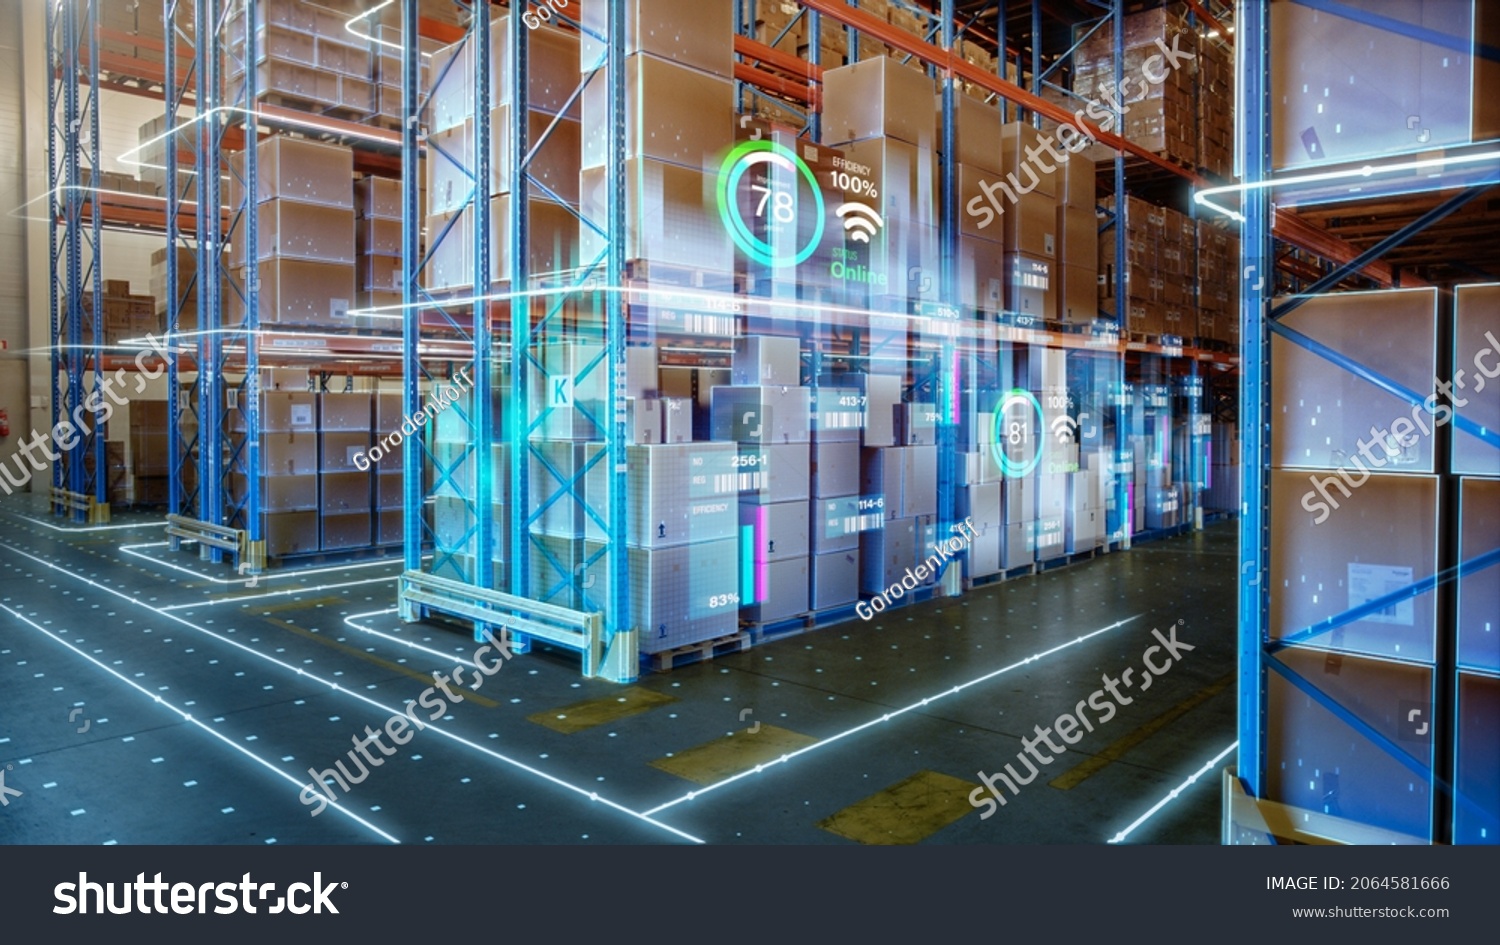 Futuristic Technology Retail Warehouse: Digitalization and Visualization of Industry 4.0 Process that Analyzes Goods, Cardboard Boxes, Products Delivery Infographics in Logistics, Distribution Center #2064581666